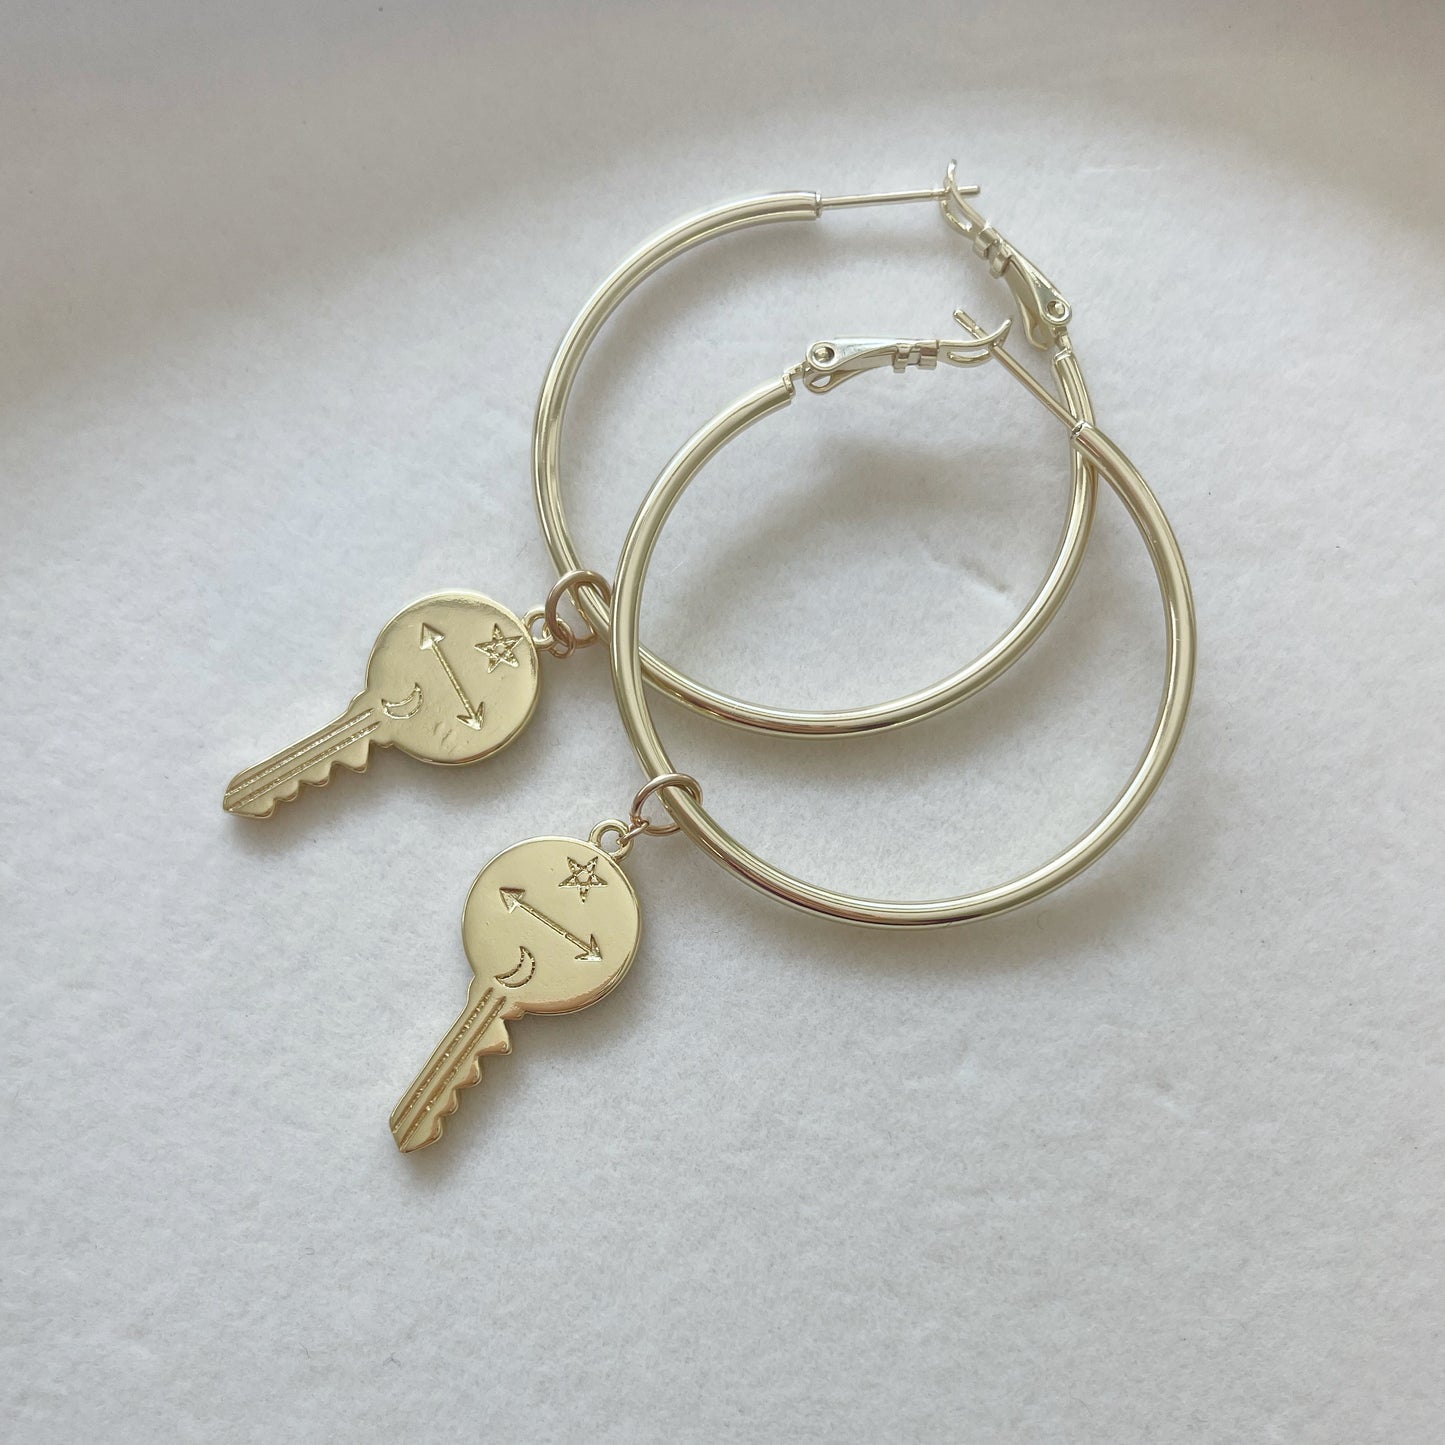 Free Your Mind Gold Filled Hoops with Key Charm